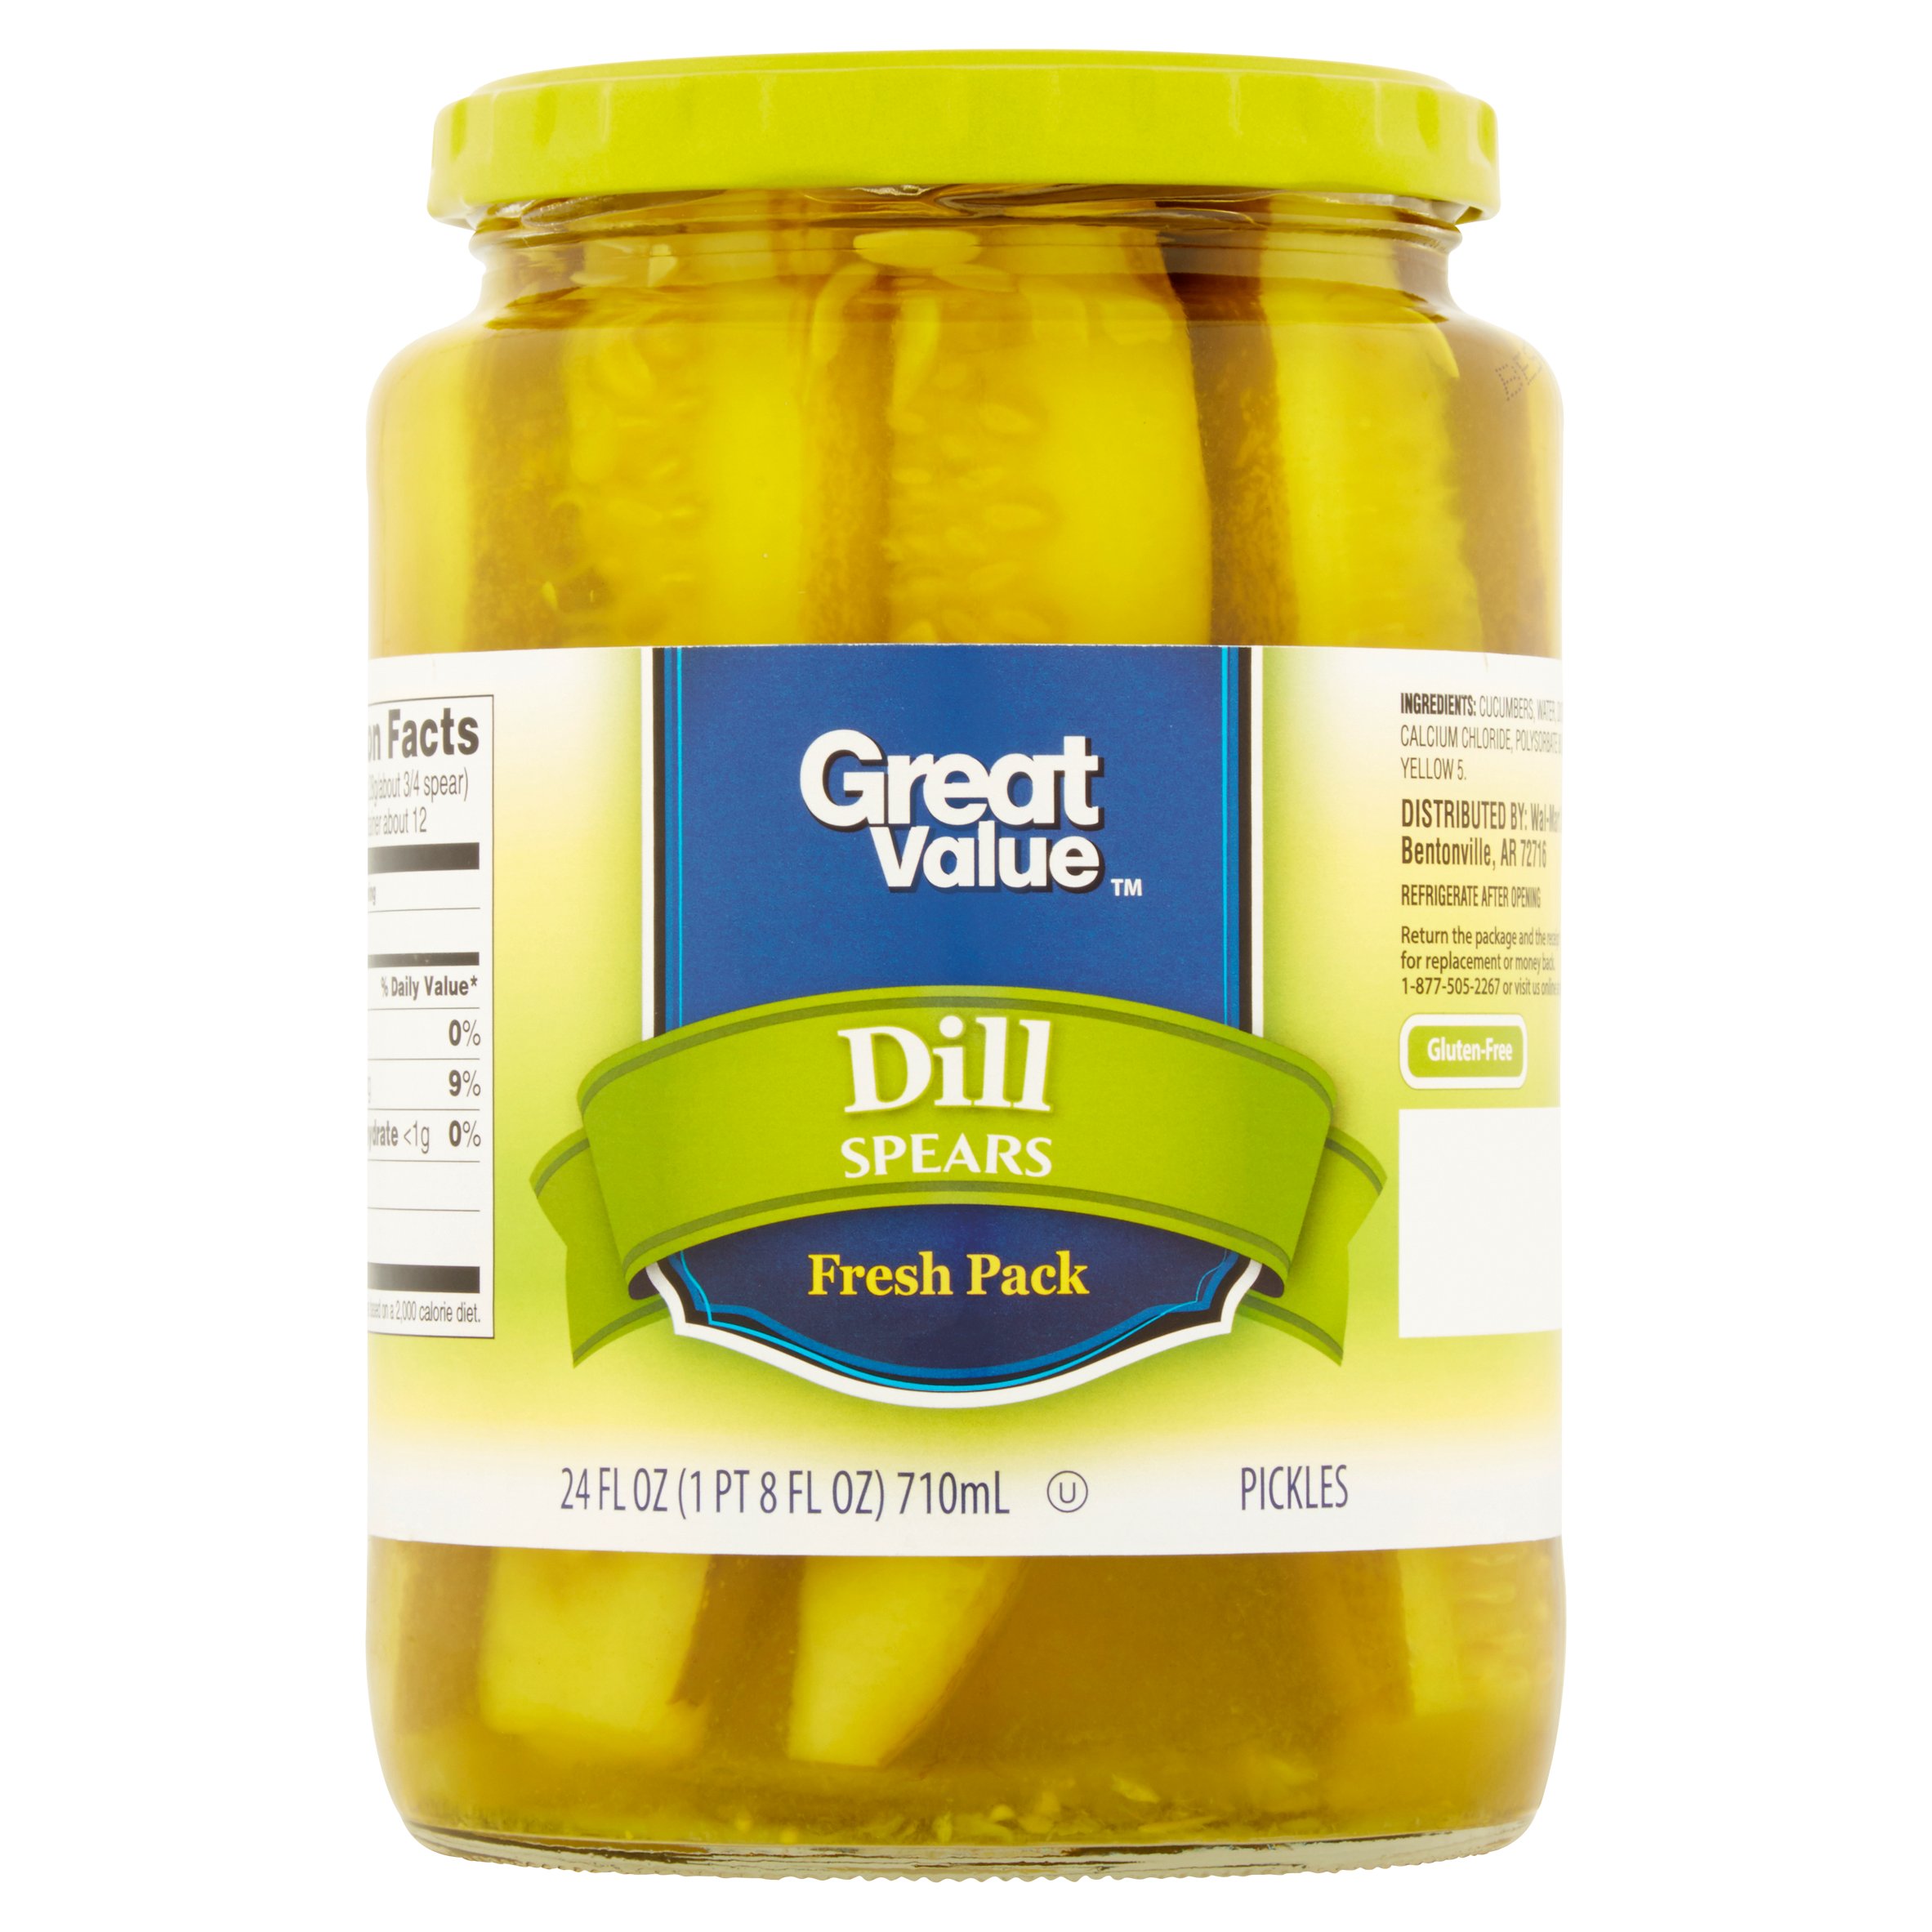 (3 Pack) Great Value Dill Spears Pickles, 24 Oz Image